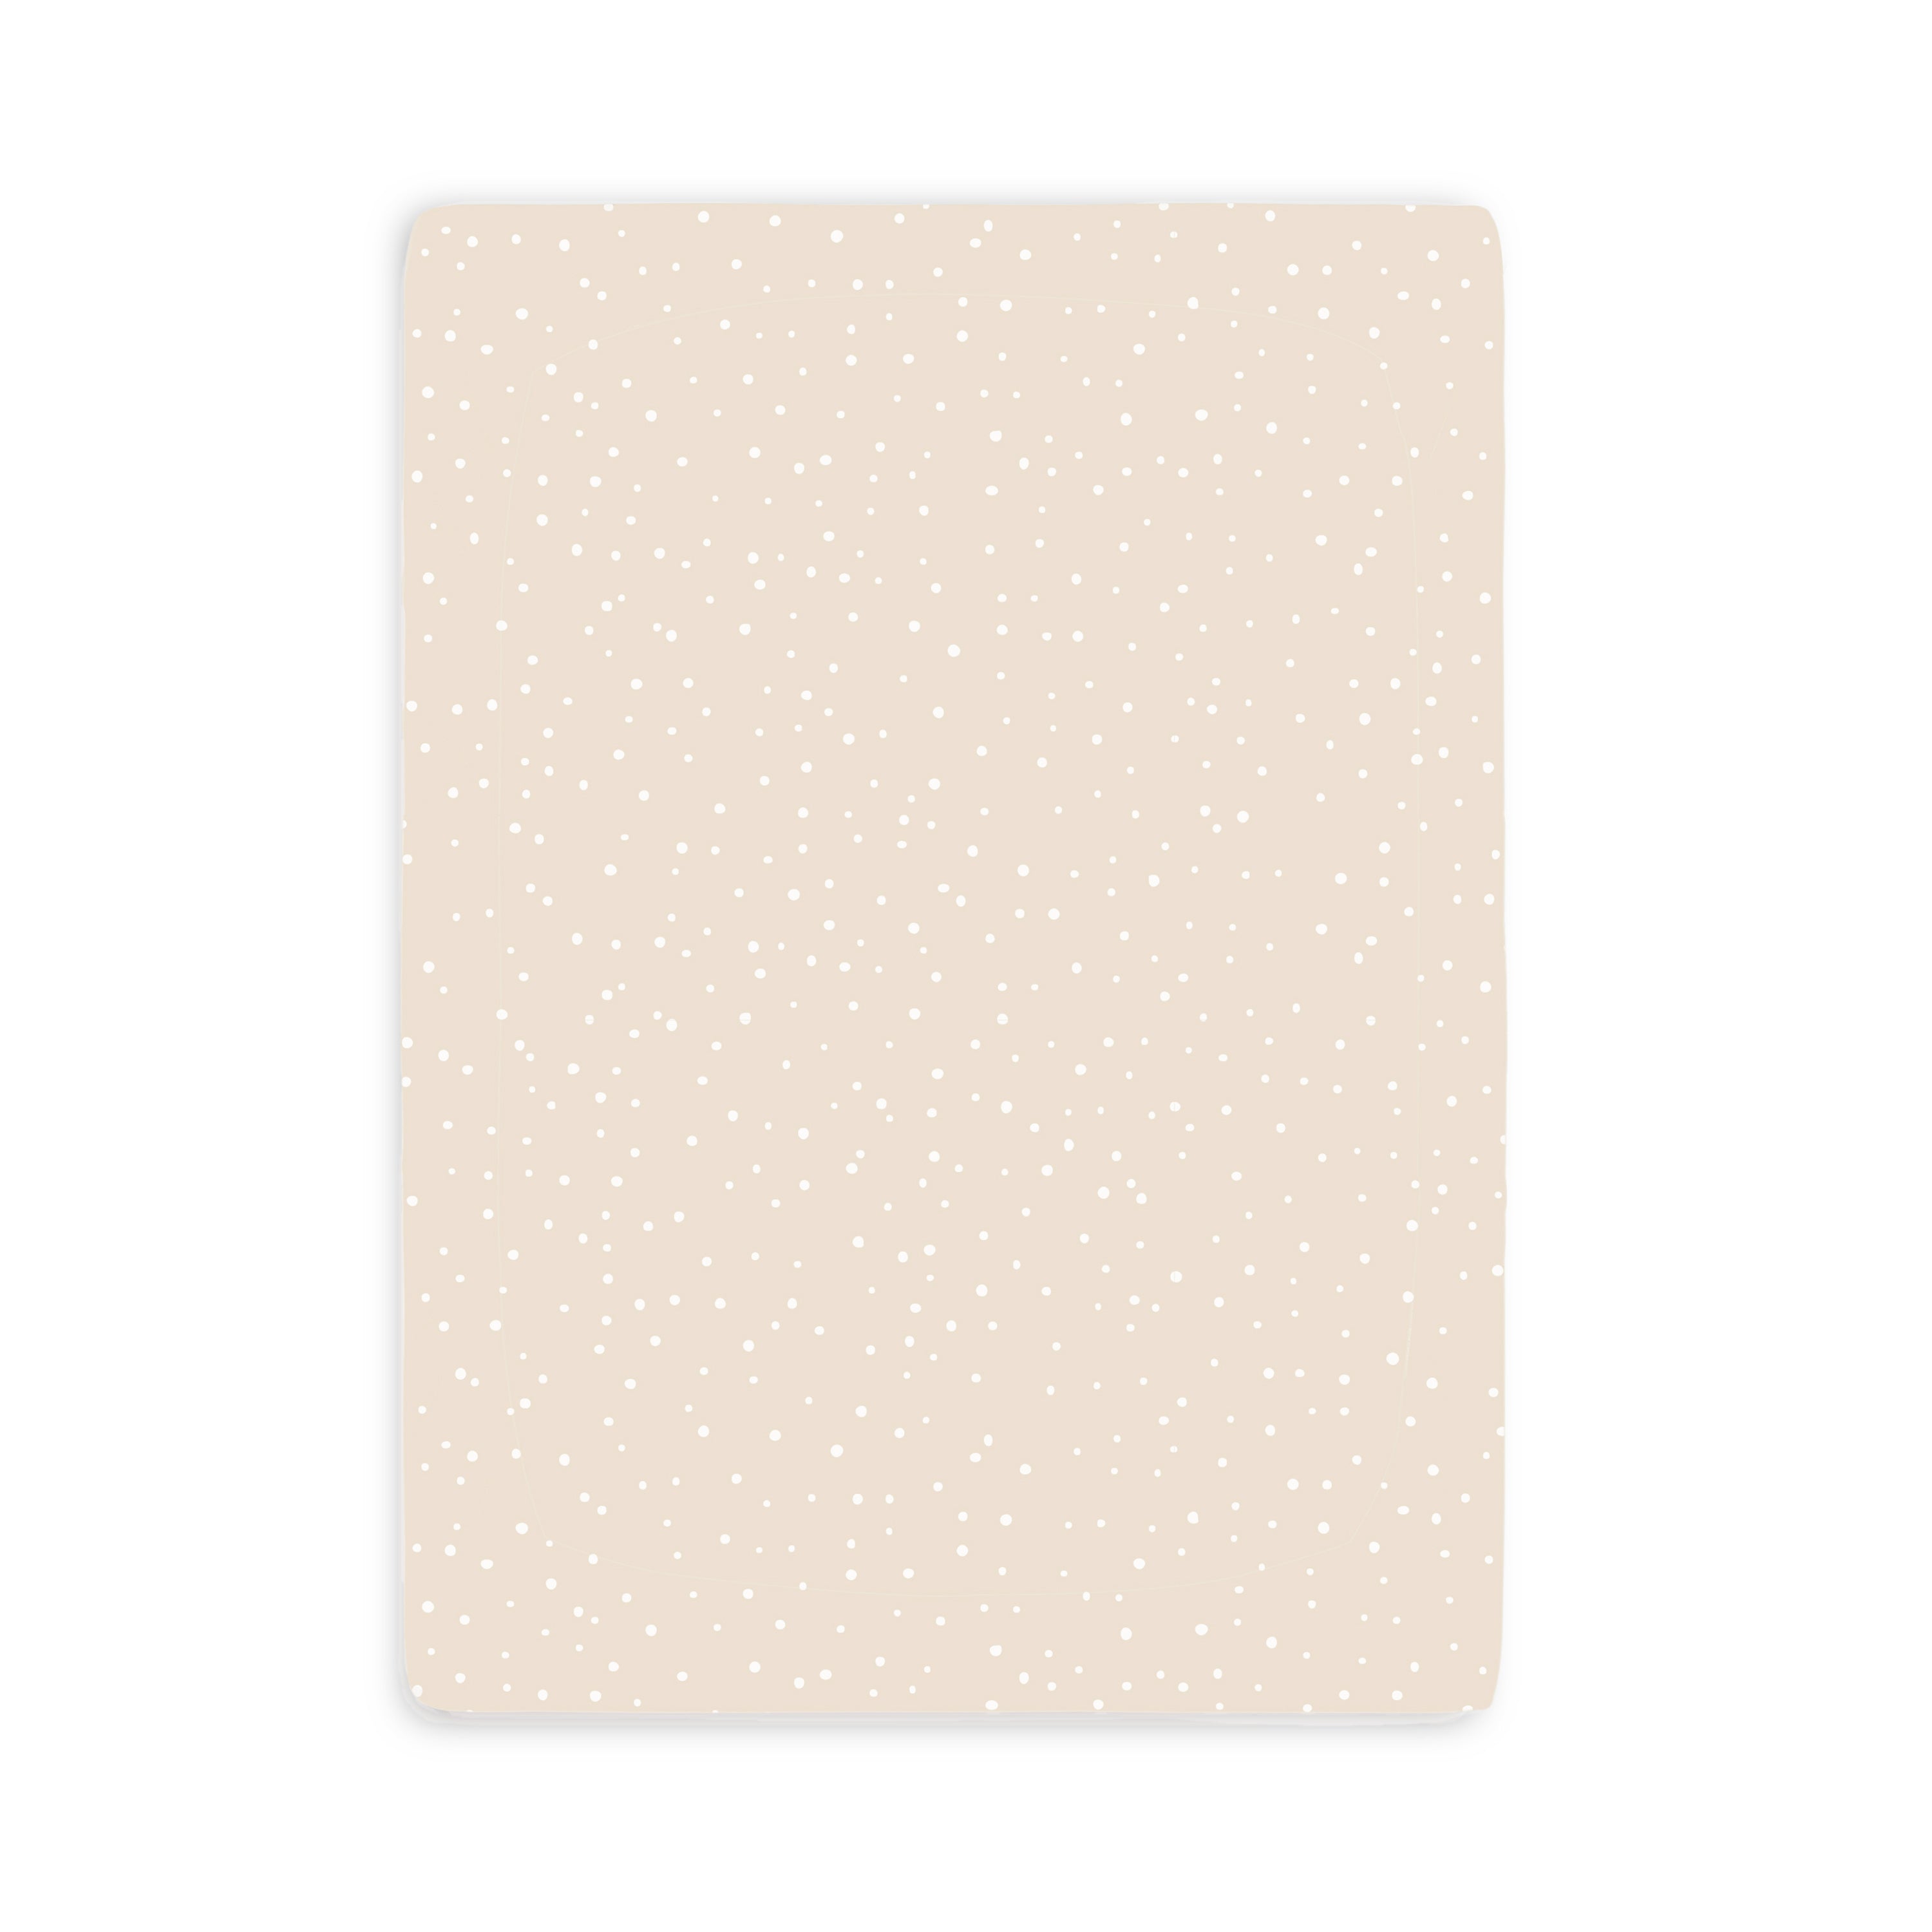 A simple rectangular card with a pale peach background dotted with small white spots, resembling a subtle polka dot pattern from Makemake Organics' Mini Crib Fitted Sheet - Polka Dots.